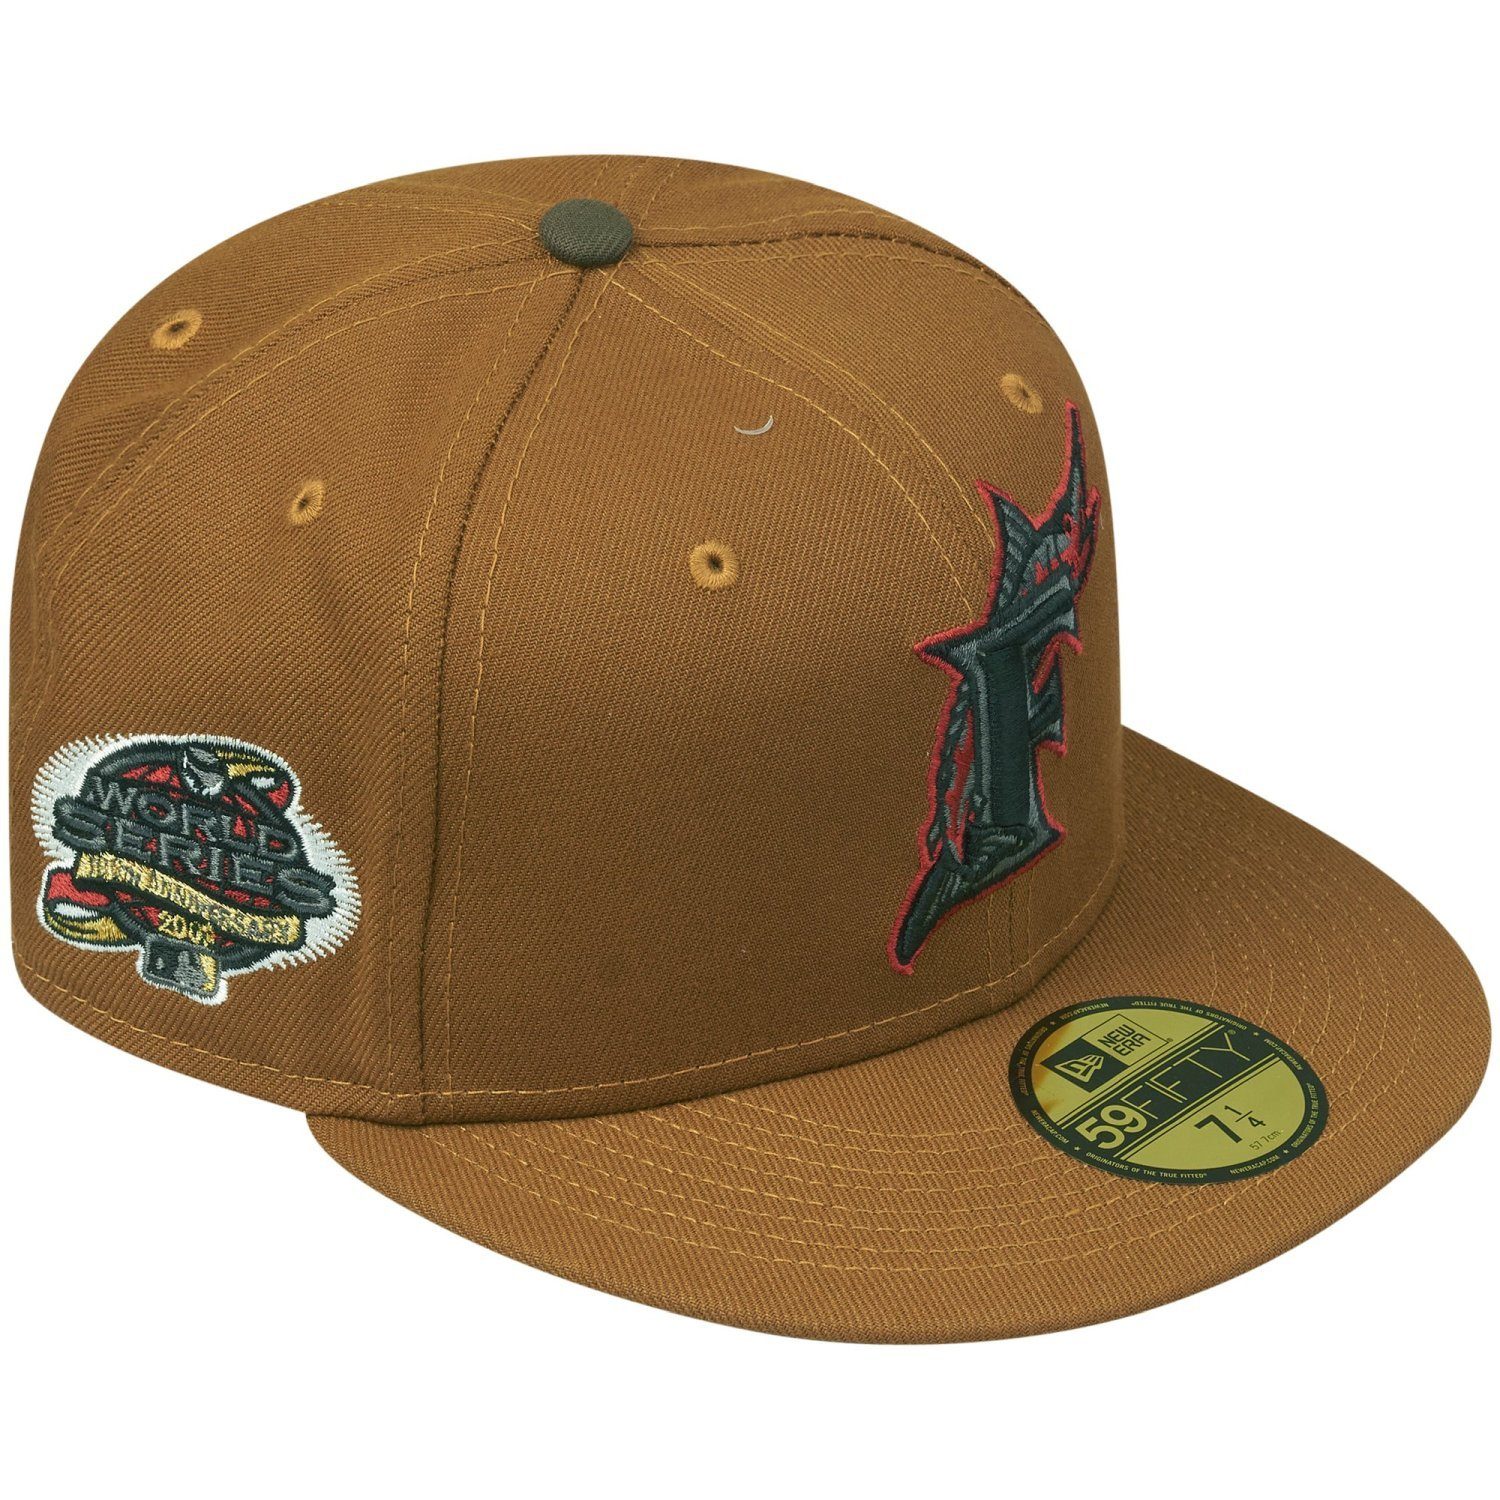 New Era Fitted Cap 59Fifty WORLD SERIES Marlins 2003 Florida